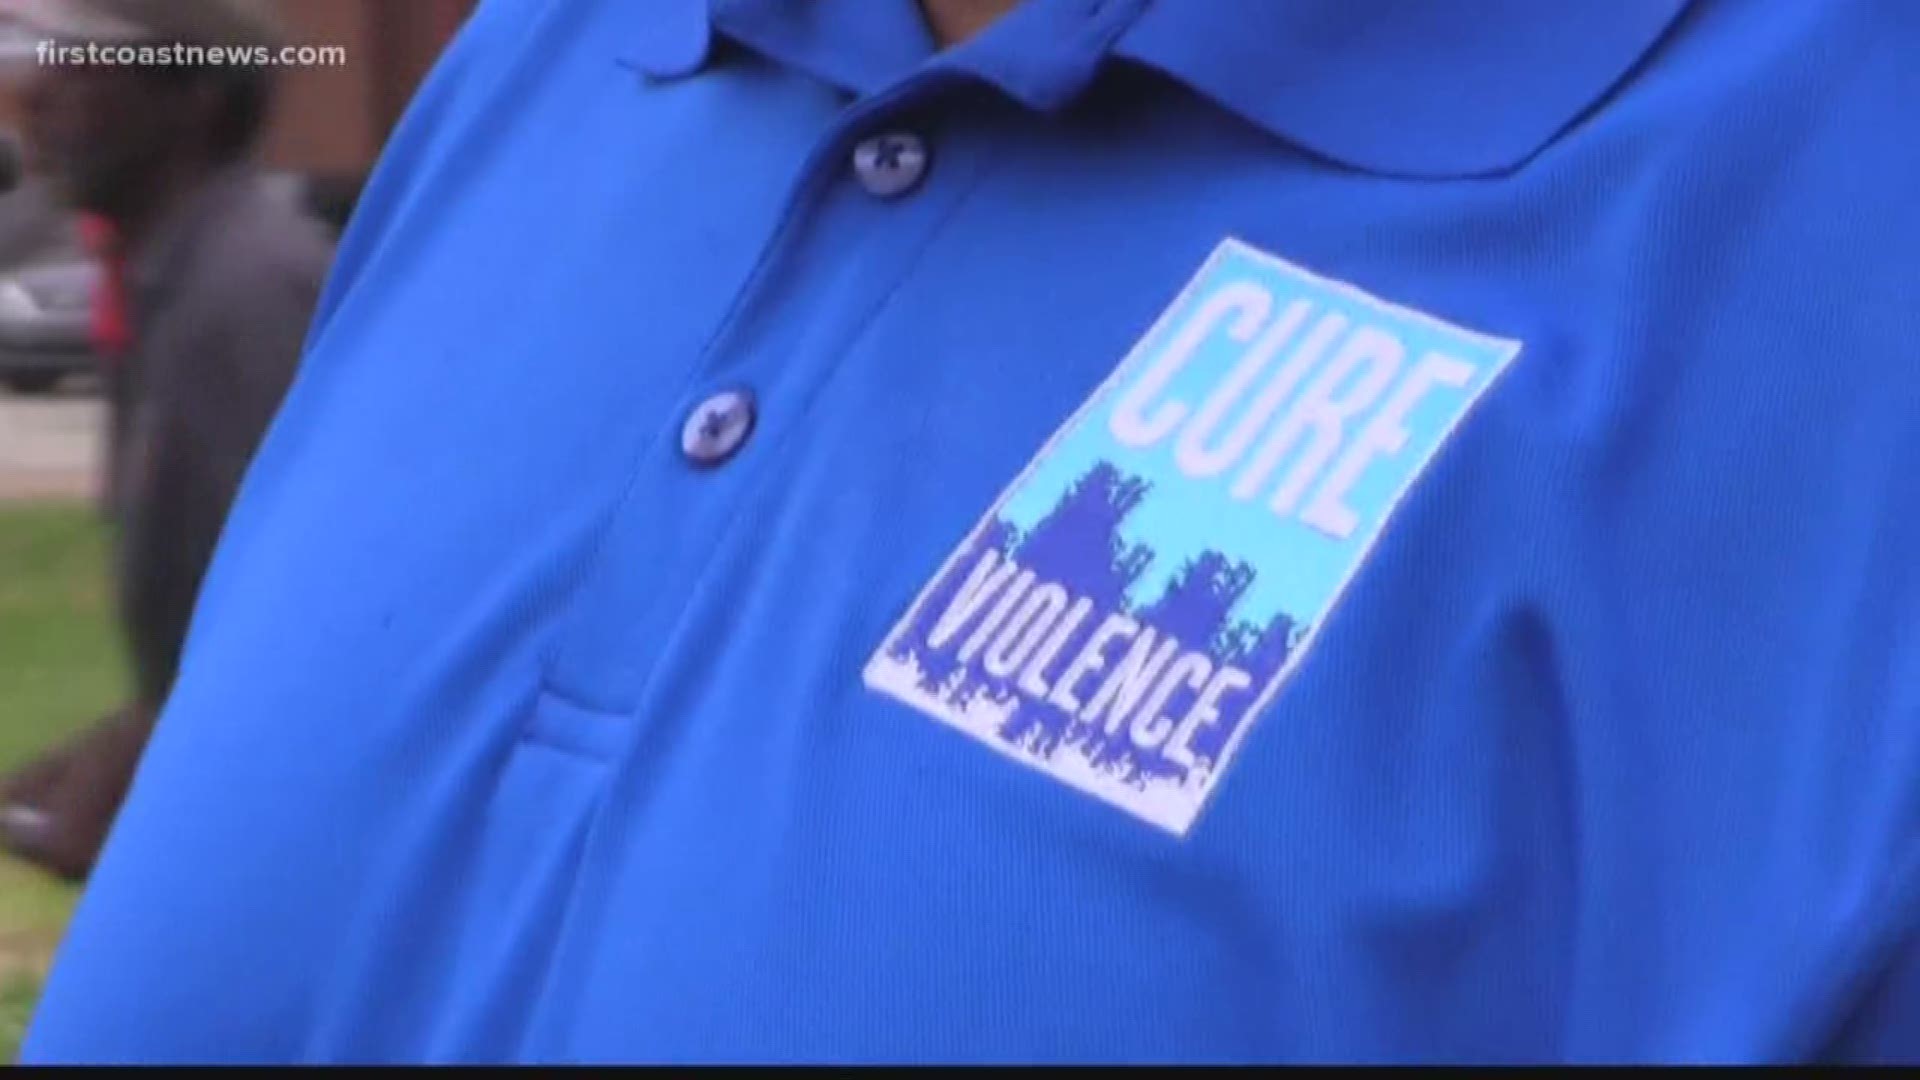 Crime and safety is the number one issue people here in Jacksonville are concerned about and JSO is expected to get another raise in money to fund the projects and personnel they believe will help bring the violence down.